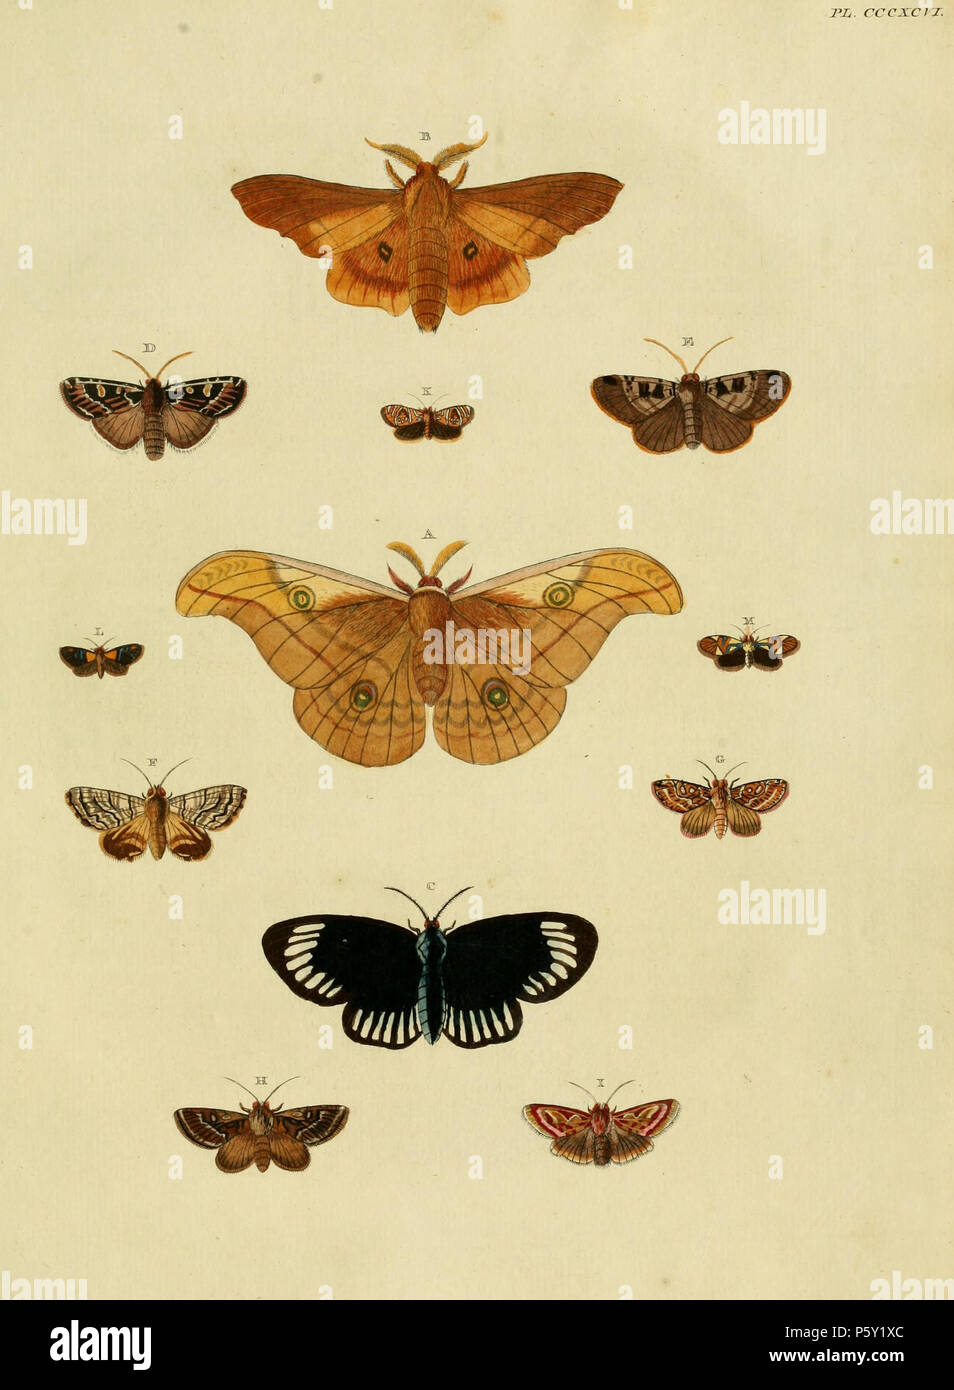 N/A. Plate CCCXCVI Warning: some taxa/names may be misidentified/misapplied or placed in a different genus.  A: [ Phalaena] Jana ( = Antheraea jana (Stoll, 1782) (in Funet) or (Cramer, 1782) (in Lepindex), see Funet and NHM, Global Lepidoptera Names Index). Photos at Barcode of Life.  B: [ Phalaena] Molina ( = Syssphinx molina (Cramer, [1780]), see Funet). Photos at Barcode of Life.  Male. Female on pl. 302 E, F.  C: [ Phalaena] Aletta ( = Hypocrita aletta (Stoll, [1782]), iconotype, see Funet). Photos on Barcode of Life.  D: [ Phalaena] Lidia ( = Euxoa lidia (Stoll, [1782]), iconotype, see Fu Stock Photo